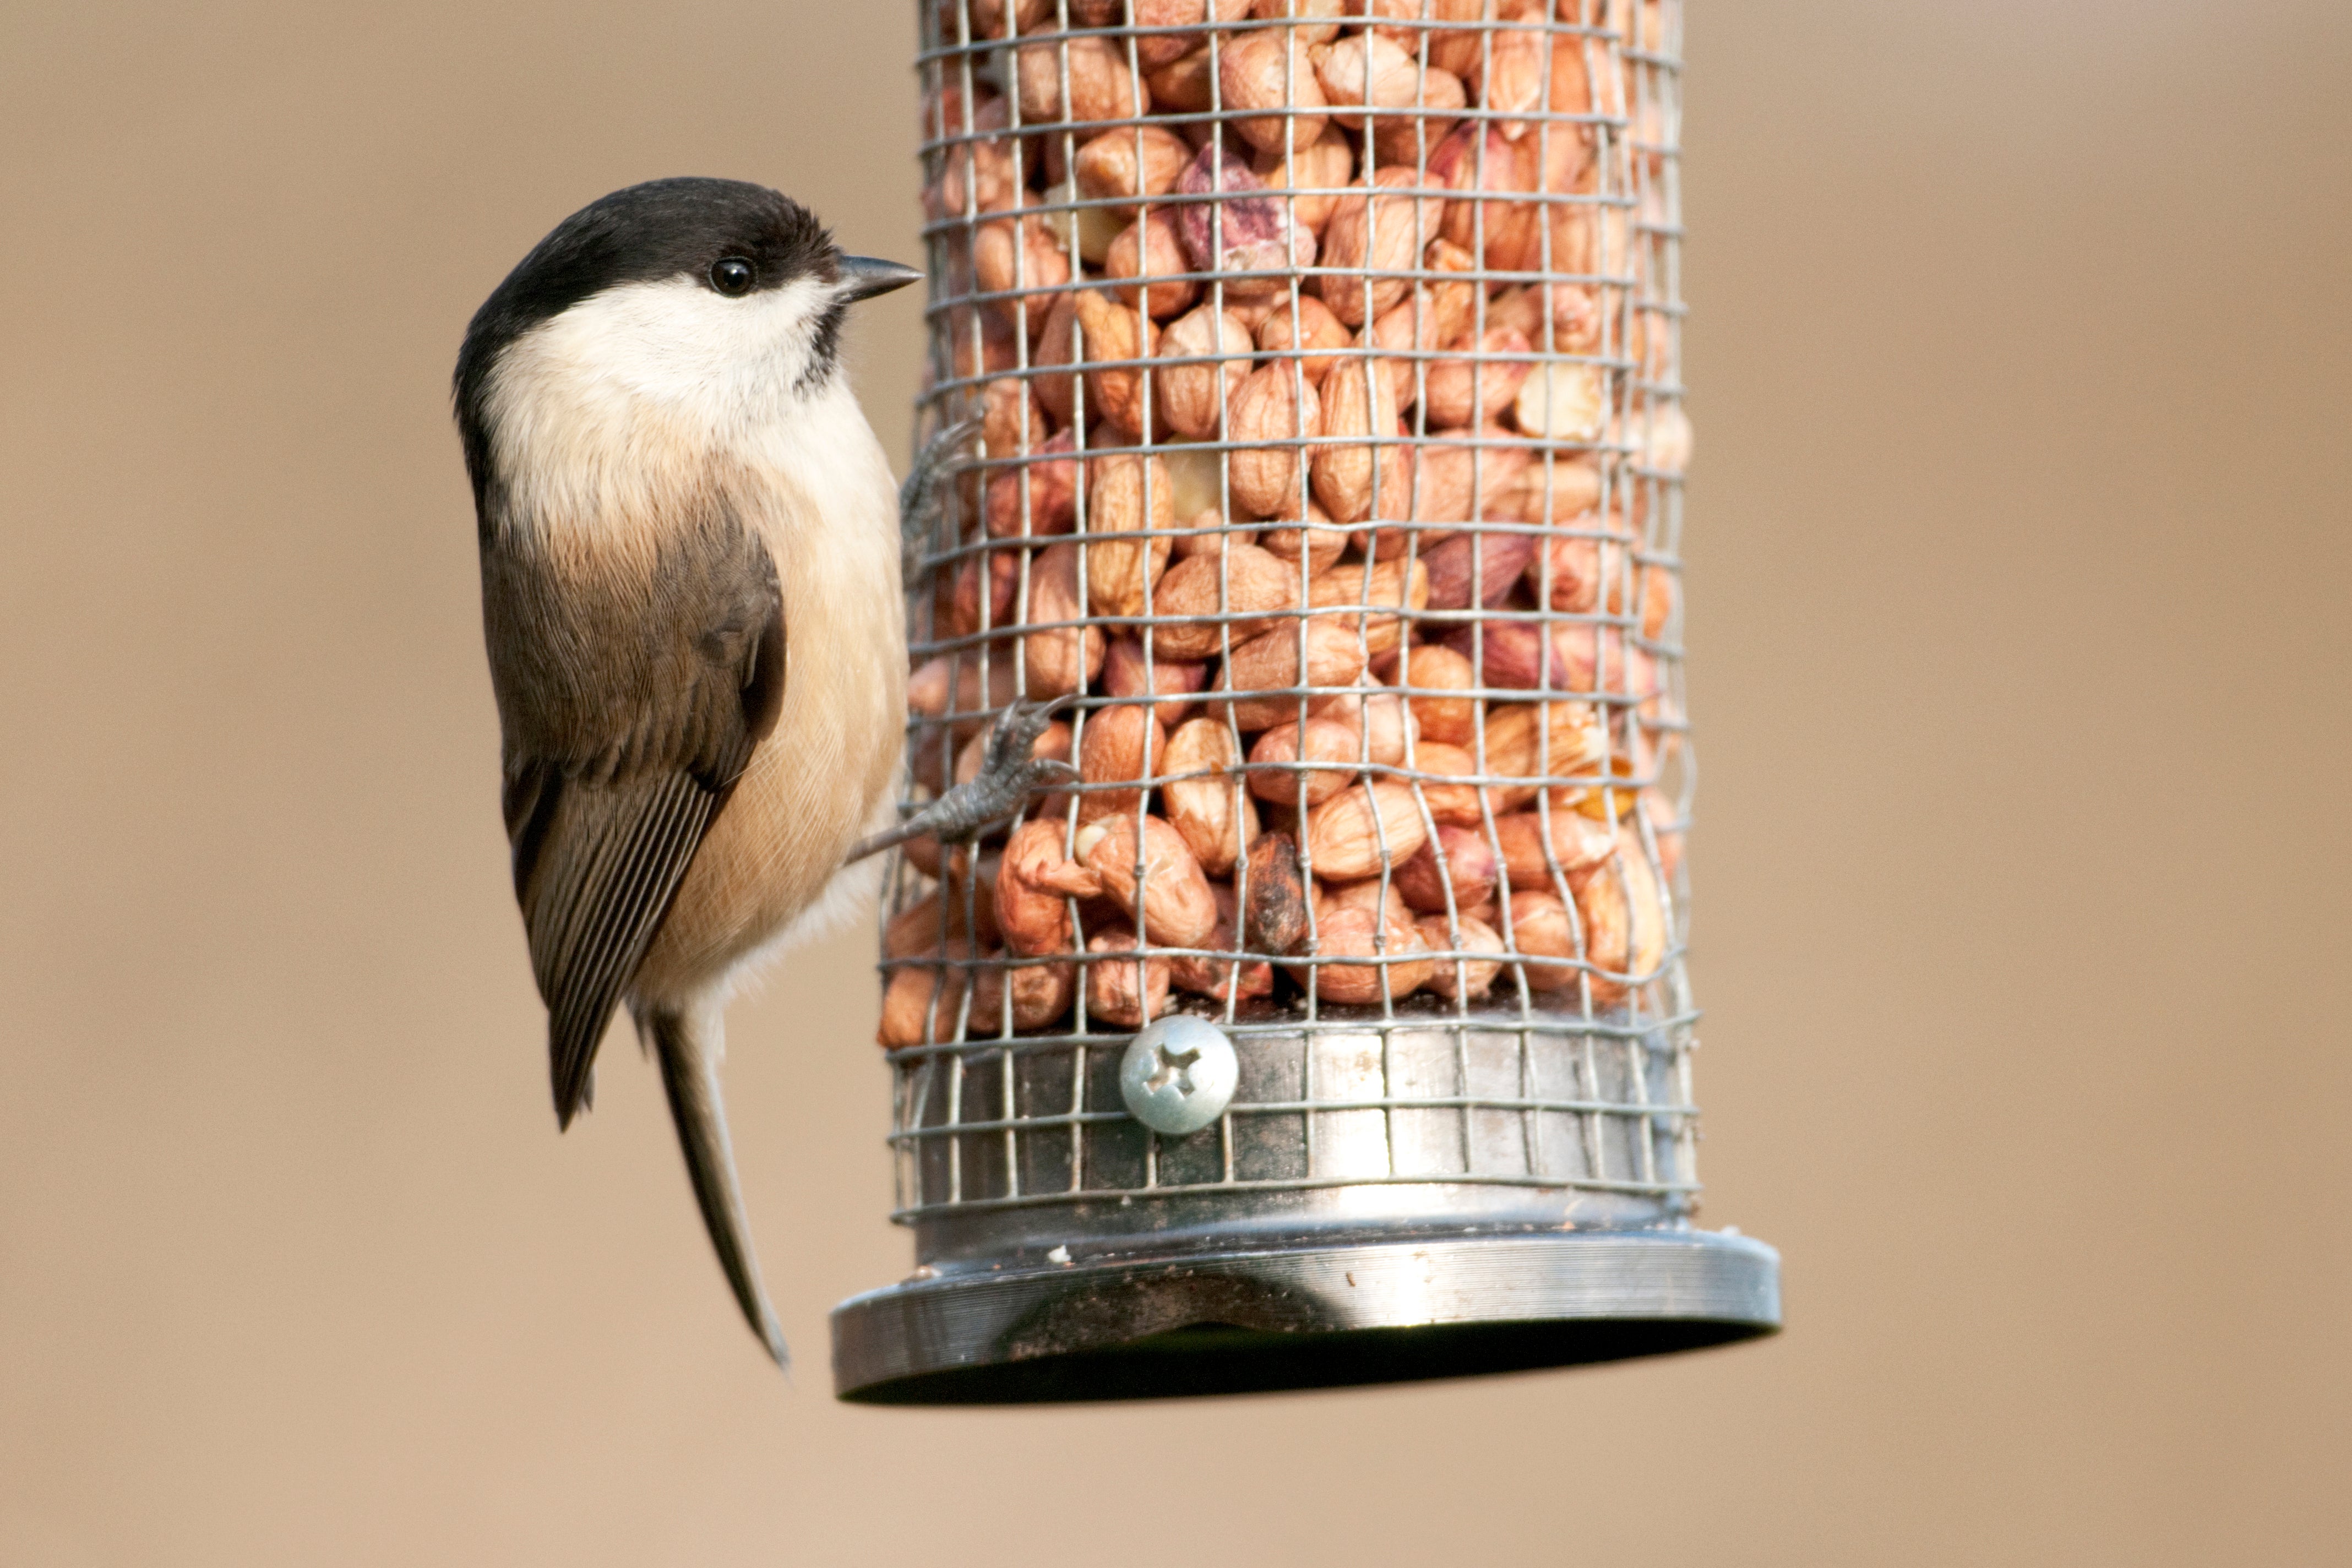 Bird Feeders Are Good for Some Species--But Possibly Bad for Others thumbnail